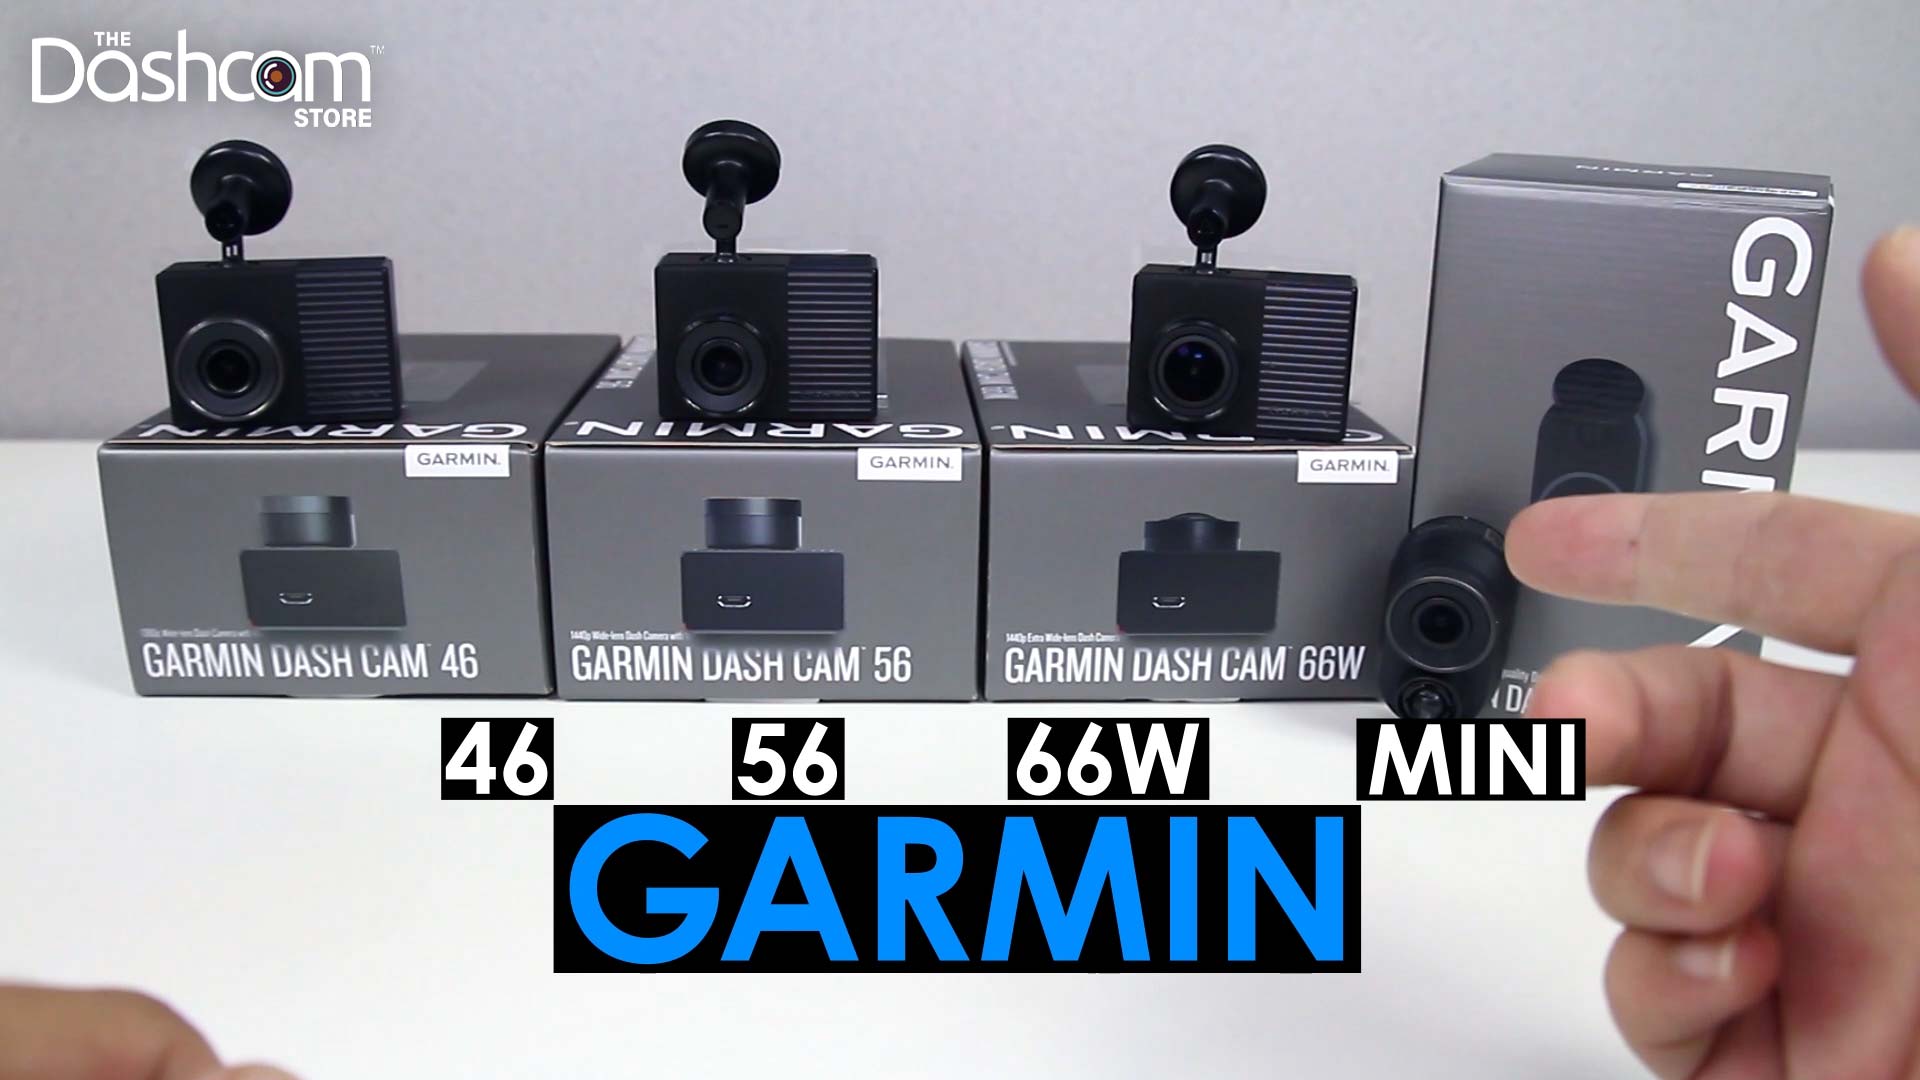 Unboxing the 46, 56, 66W, & Dash Cams - The Dashcam Store